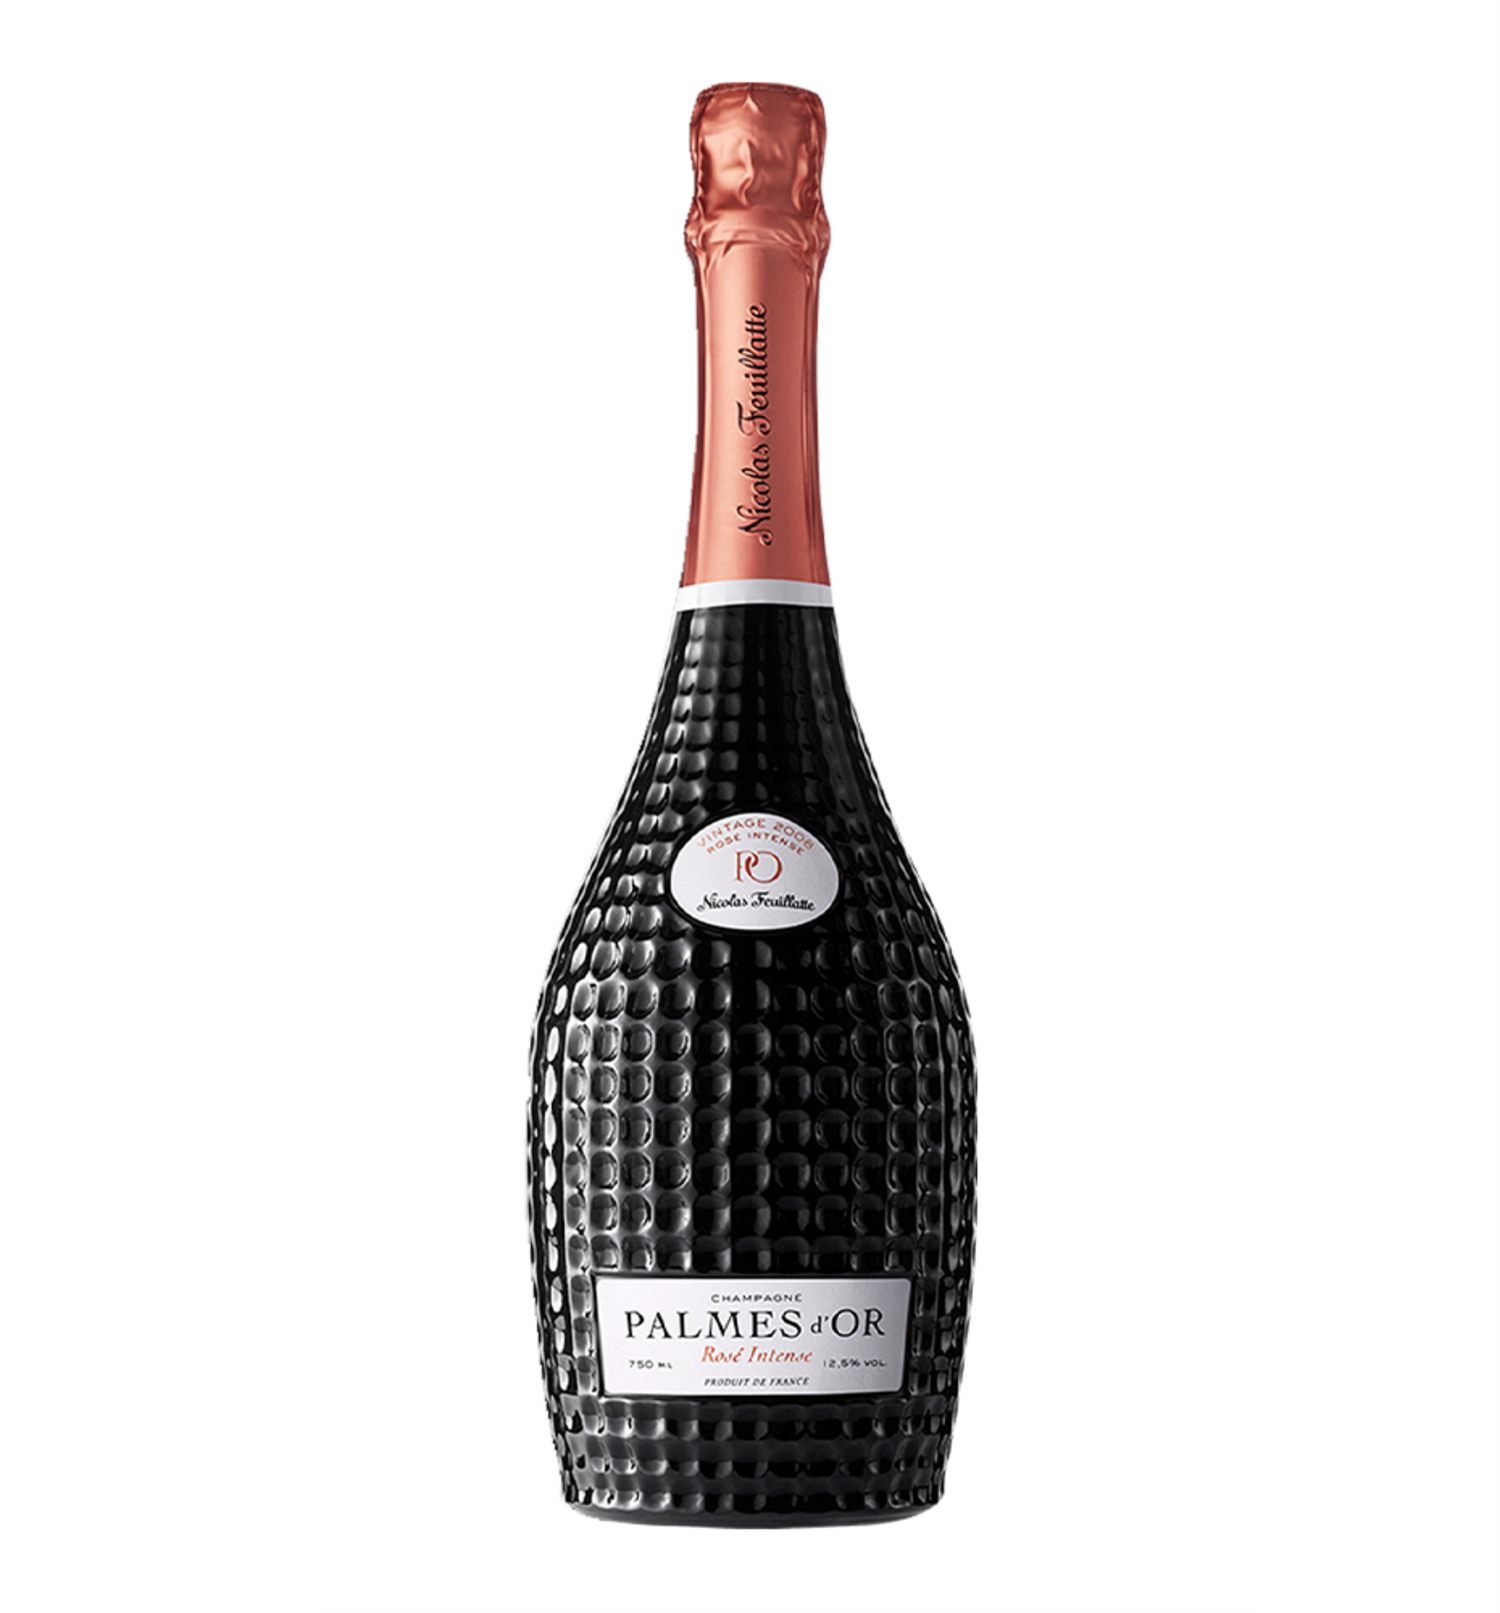 Nicolas Feuillatte Palmes D`or Rose Intense Vintage 2008 Champagne 750ml -  Uncle Fossil Wine&Spirits